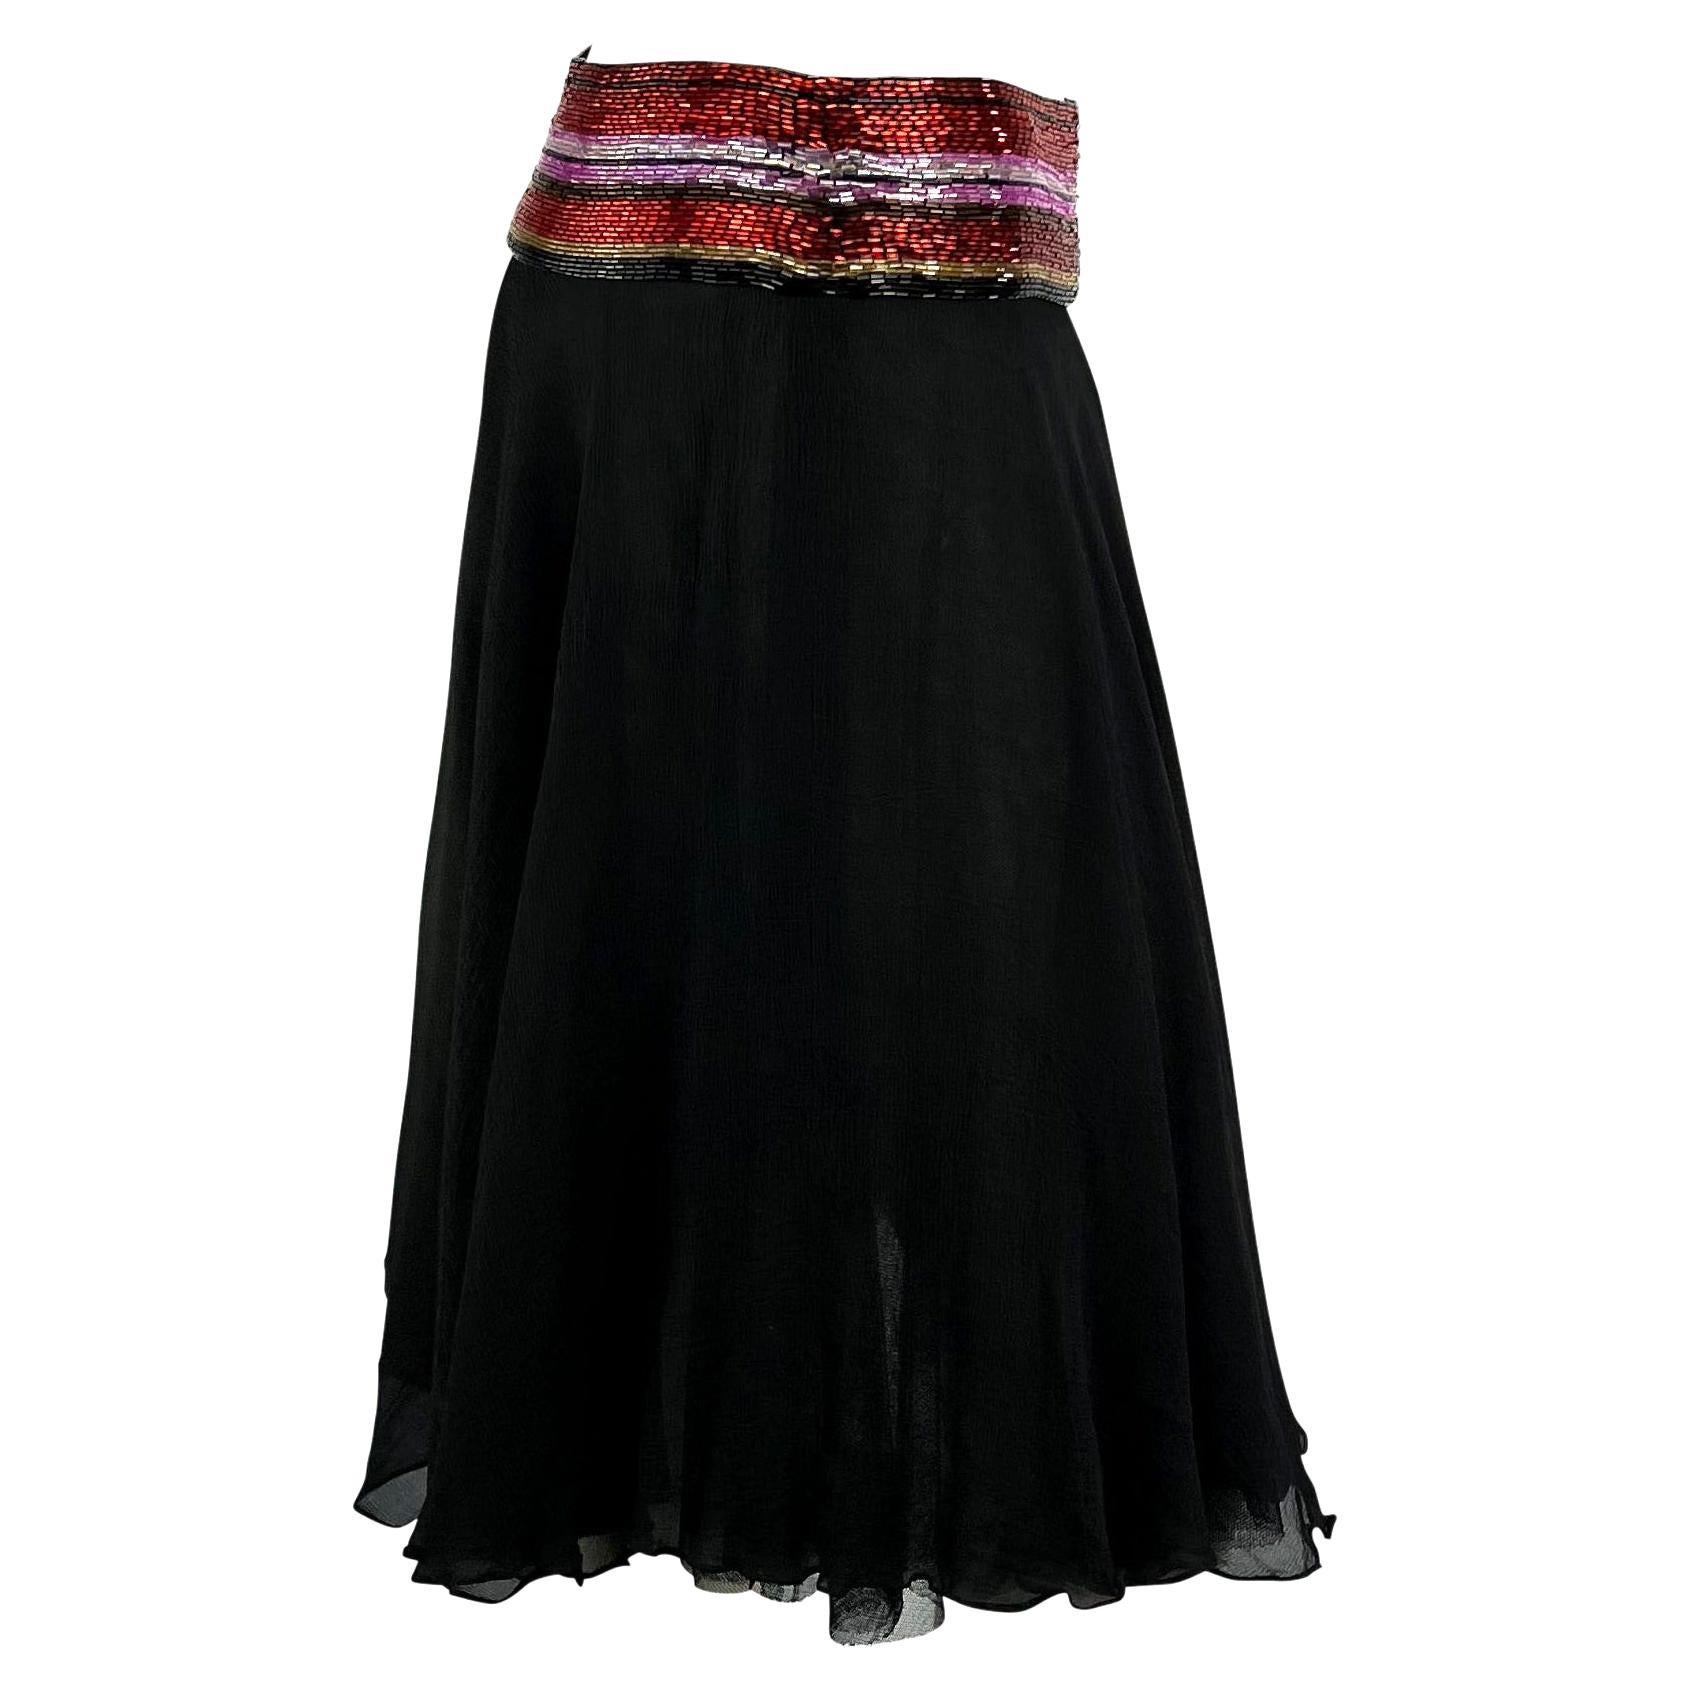 Presenting a stunning beaded Dolce and Gabbana skirt. This skirt is composed primarily of black silk chiffon and is made complete with a band of colorful red, purple, and black beads. From the Spring/Summer 2000 collection, this beautiful skirt was